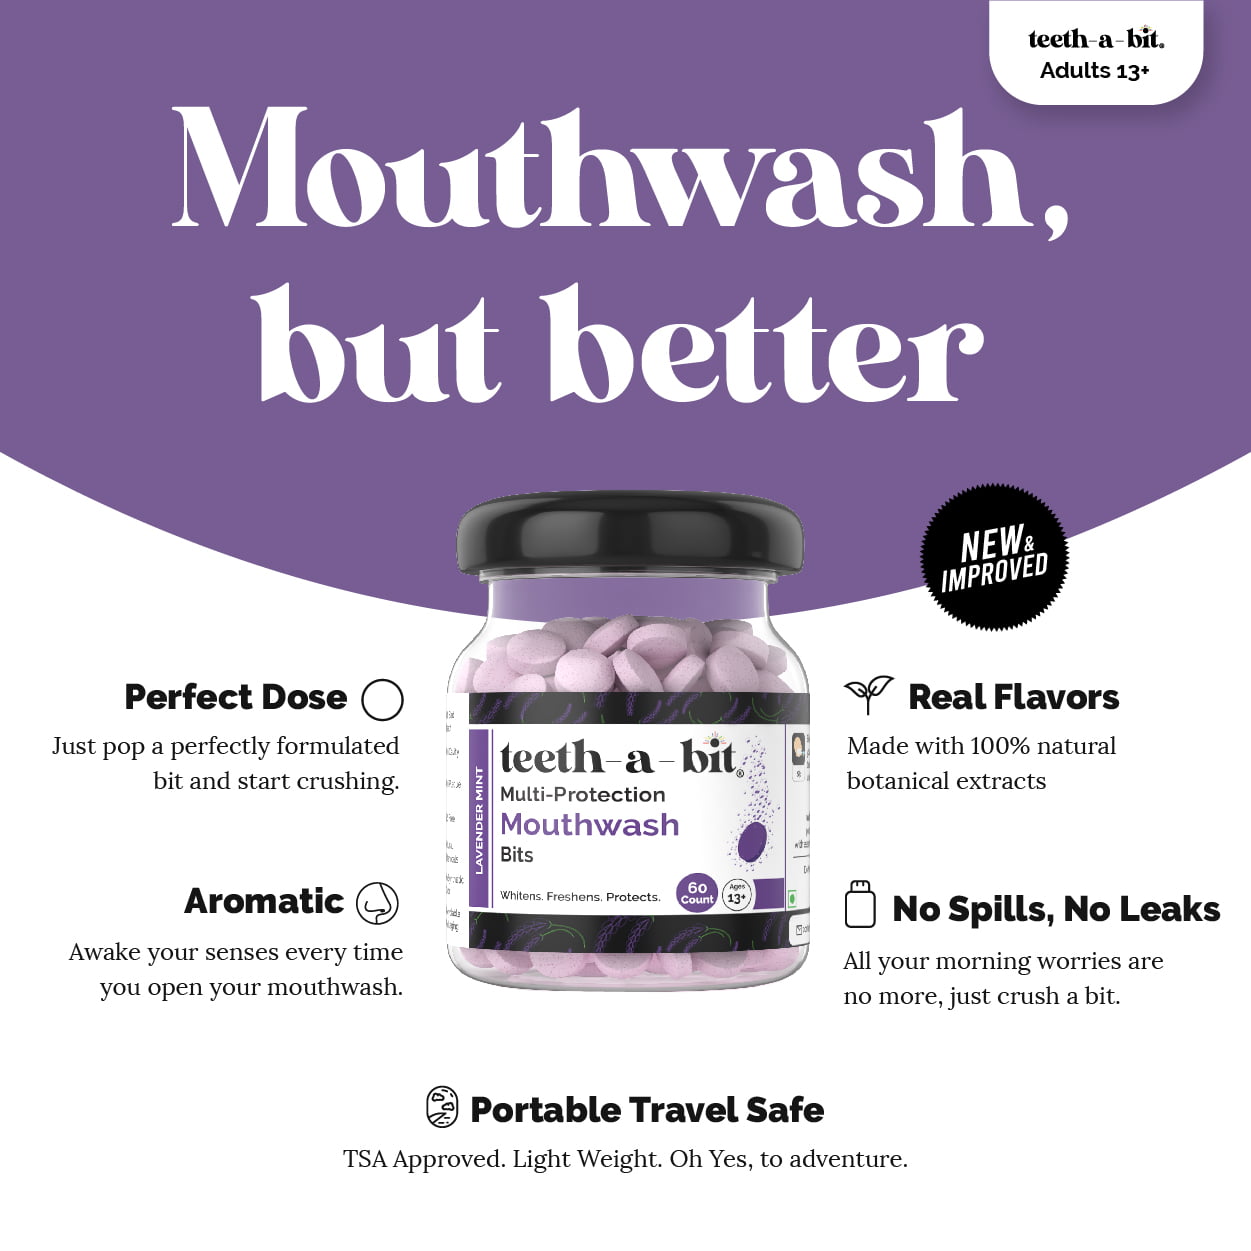 teeth-a-bit Multiprotection Lavender Mint Mouthwash Bits | Equal to 1200ml of liquid mouthwash (60 Count)